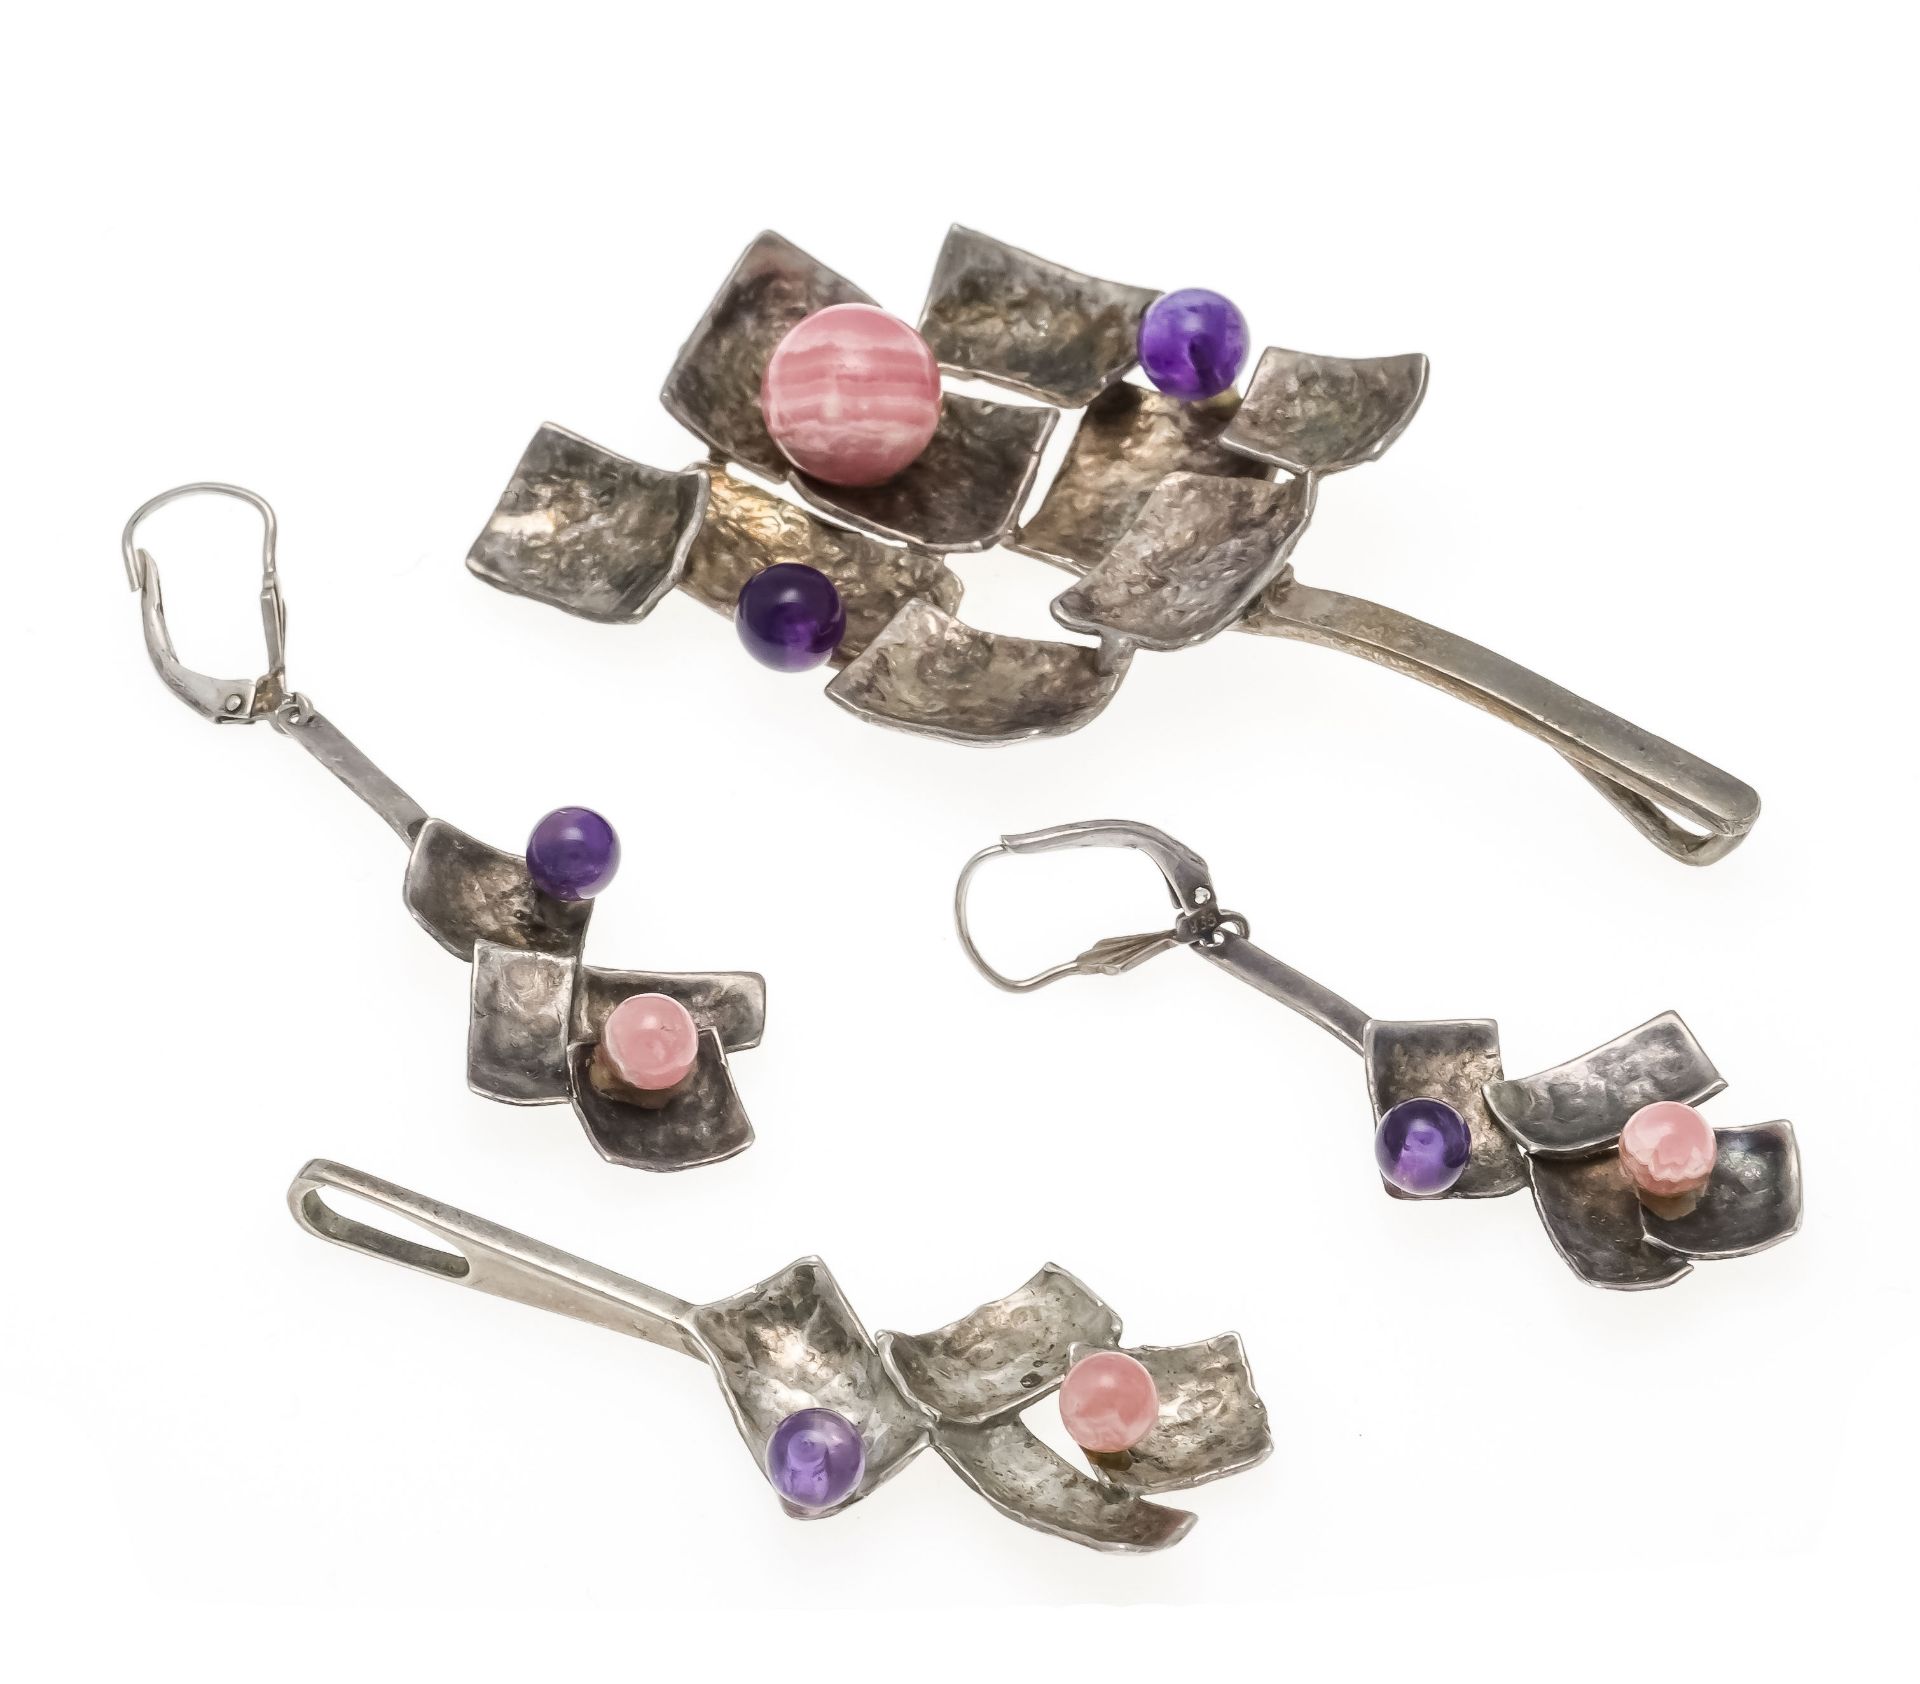 3-piece jewelry set, circa 1970, silver 835/000, consisting of rectangular elements in hammered